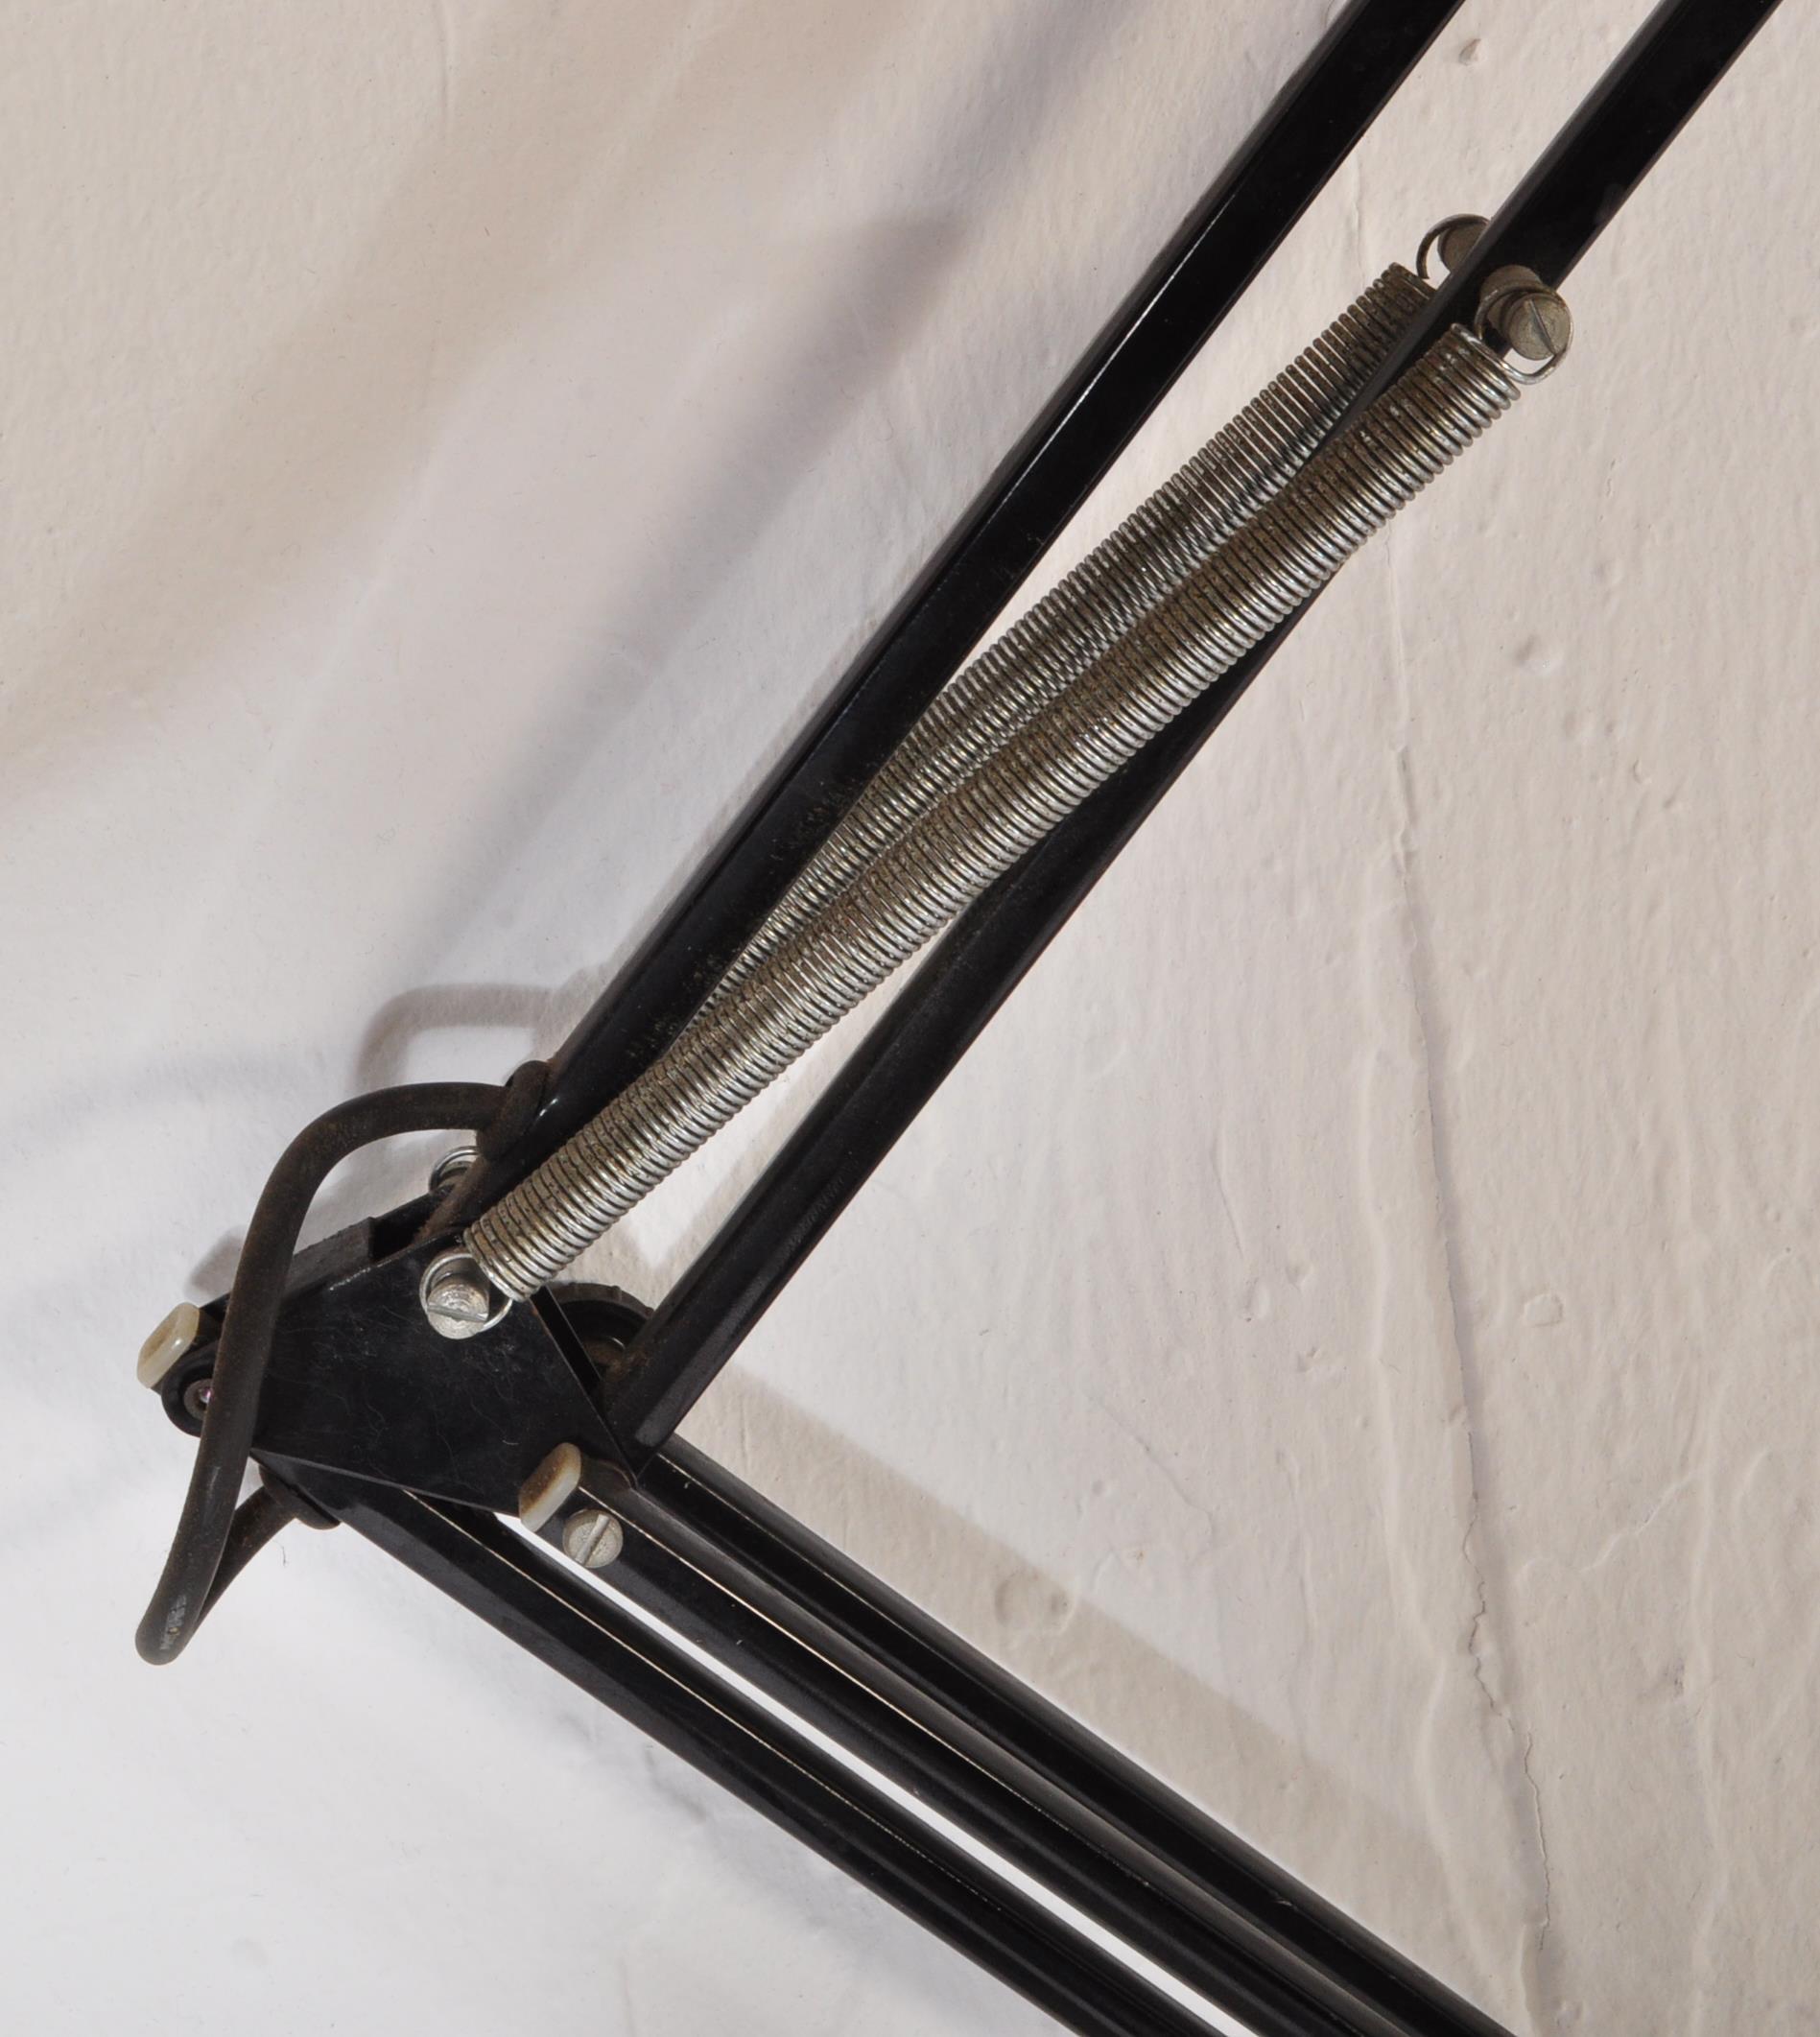 MID CENTURY 1960S BLACK ANGLEPOISE WALL MOUNTED LAMP - Image 4 of 5